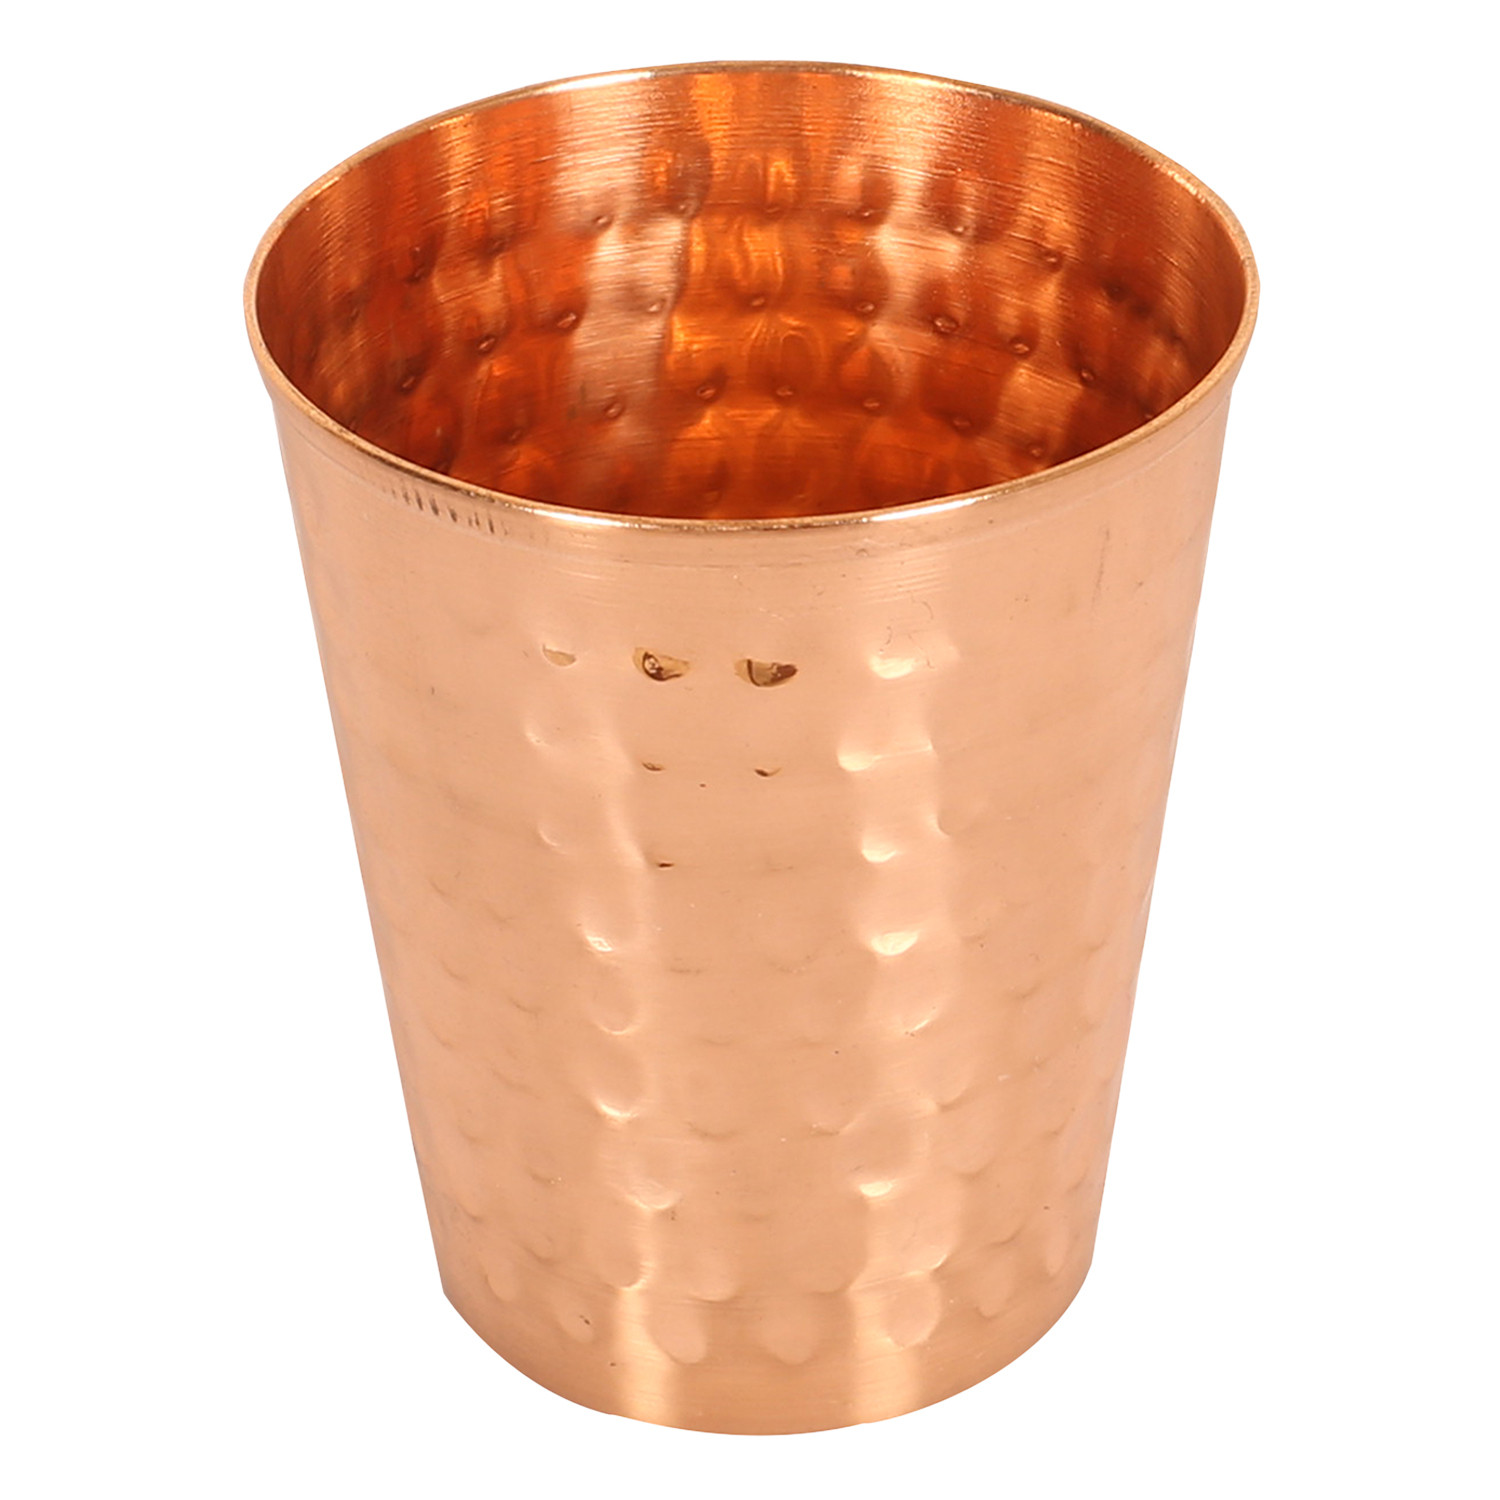 Kuber Industries Glasses | Copper Drinking Water Glass | Serving Water Glasses | Hammered Copper Glass Tumbler for Kitchen & Health Benefits| Copper